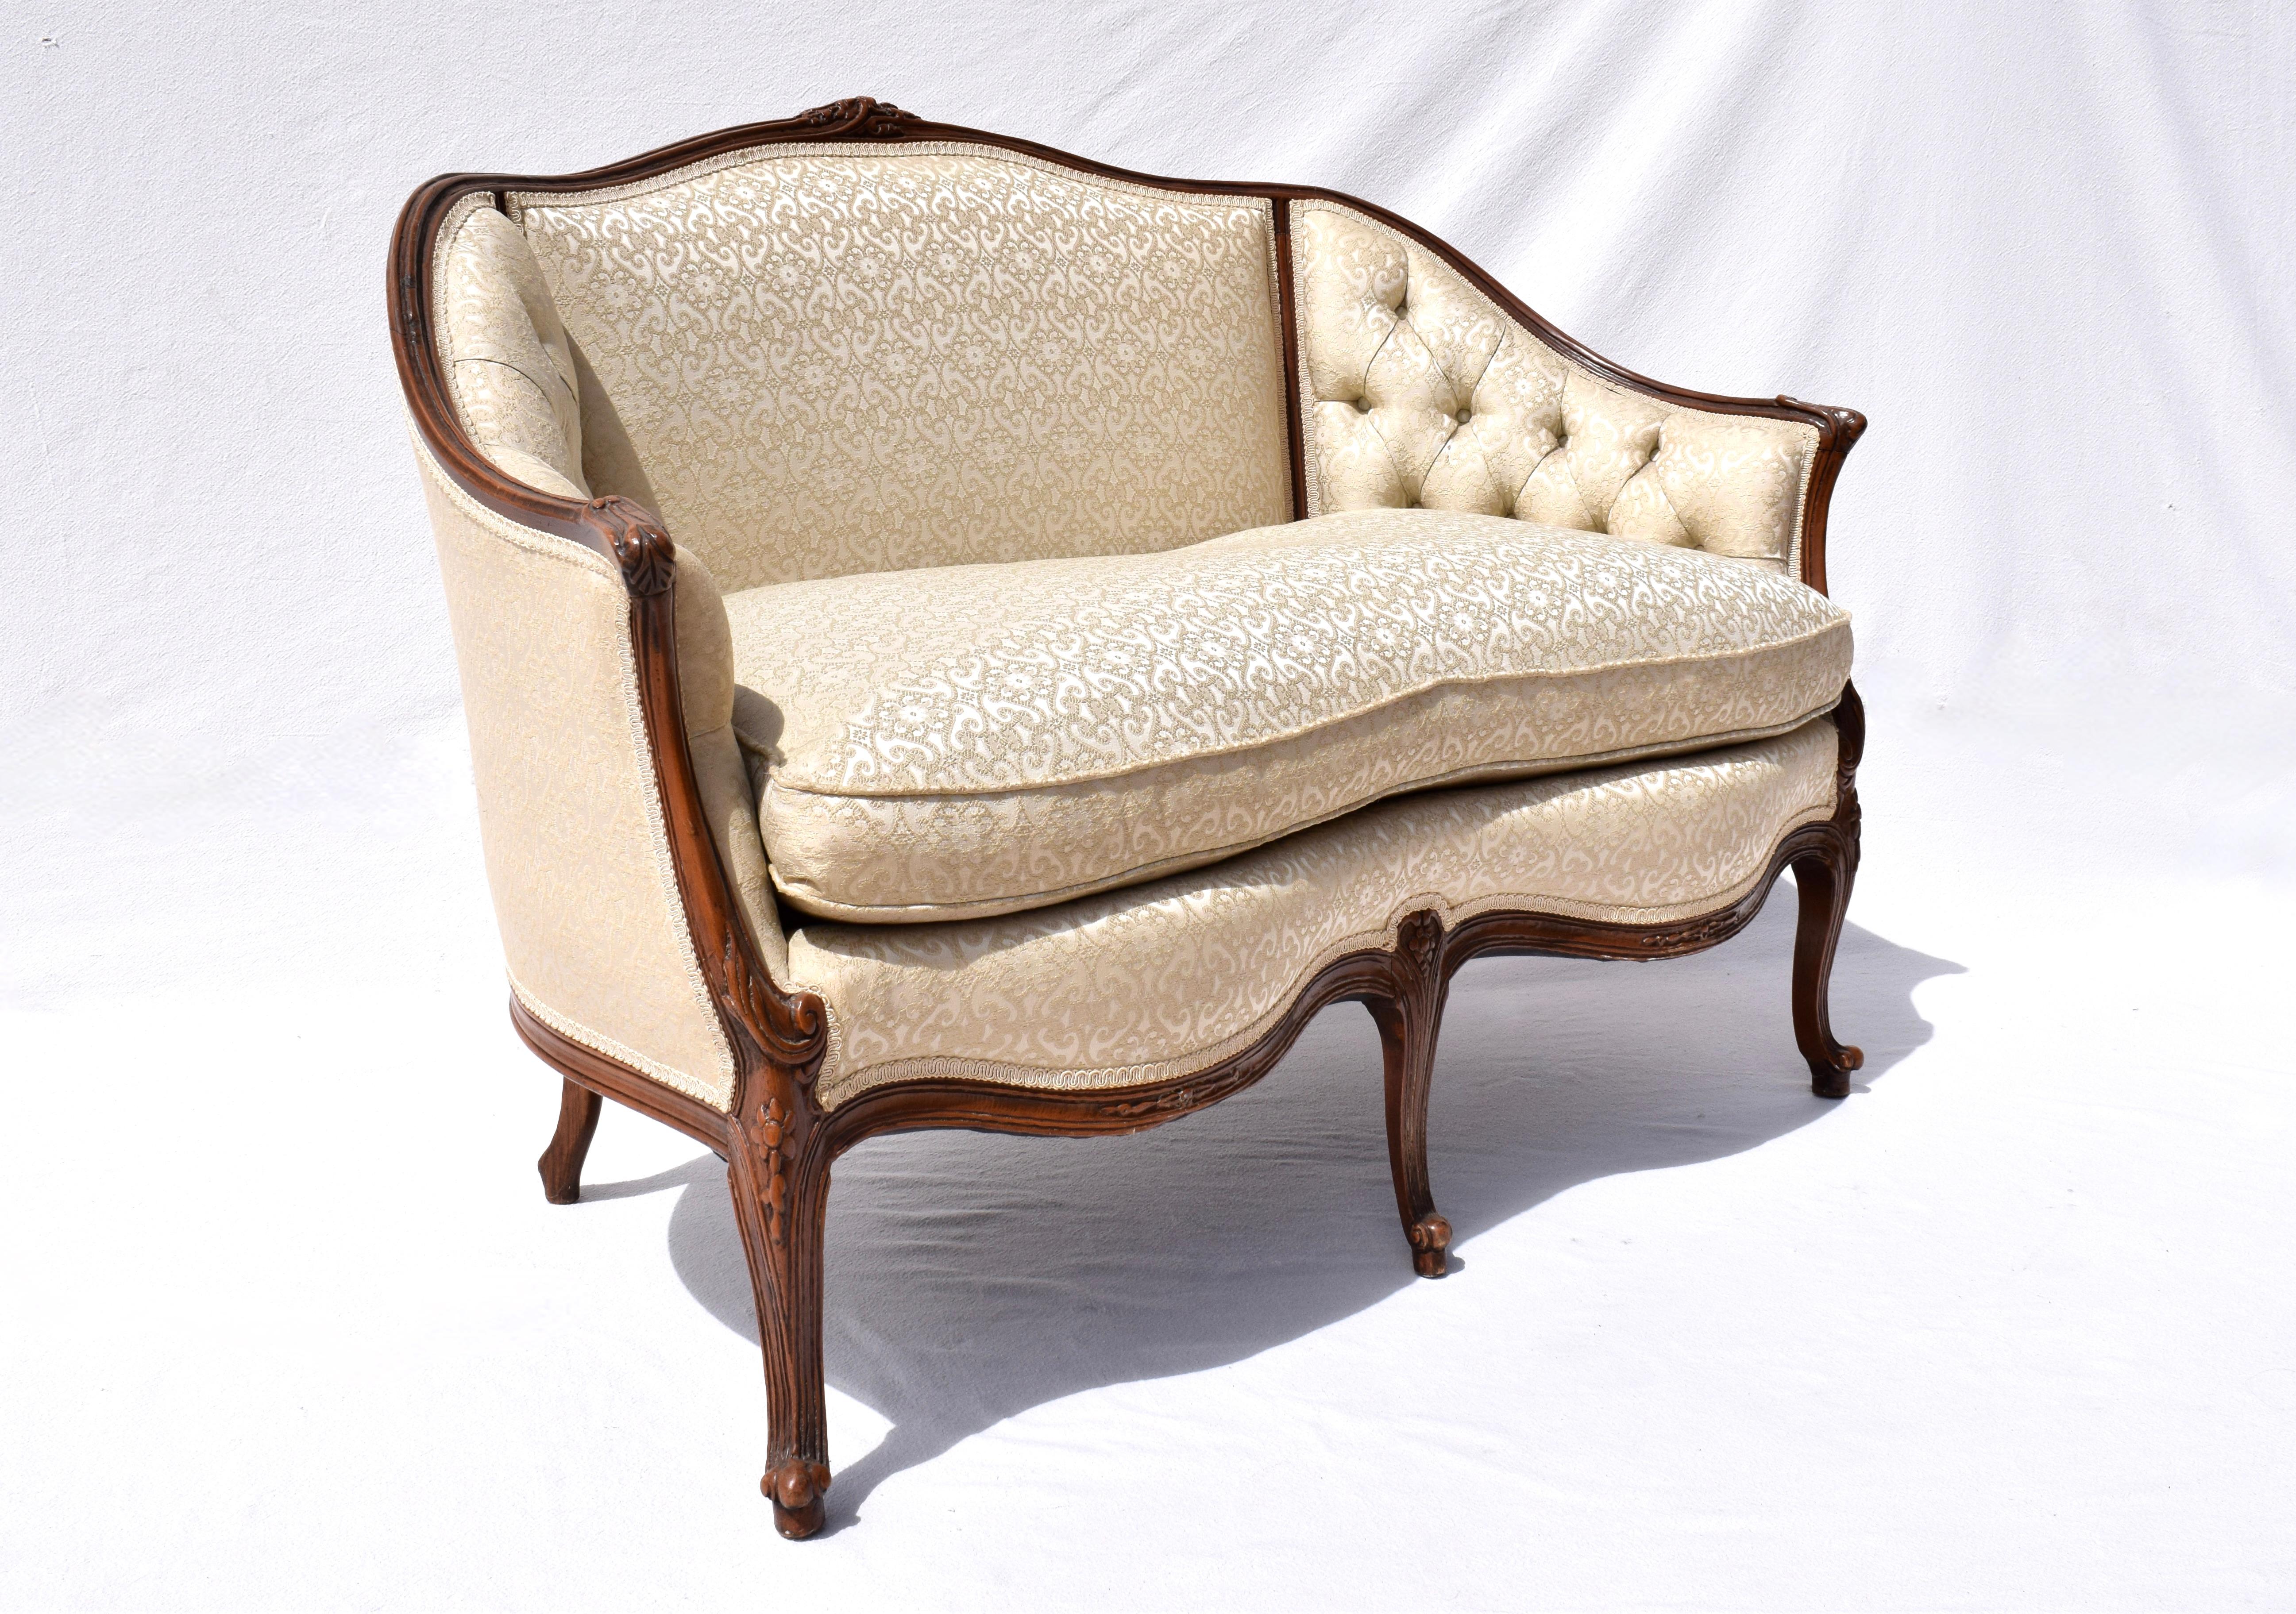 Early 20th C. Louis XV style Canape loveseat settee in tufted brocade with plush goose down loose cushion, wrap around back & hand carvings throughout. A very sweet loveseat of heirloom quality, nicely  maintained & ready for use. Cozy dimensions;